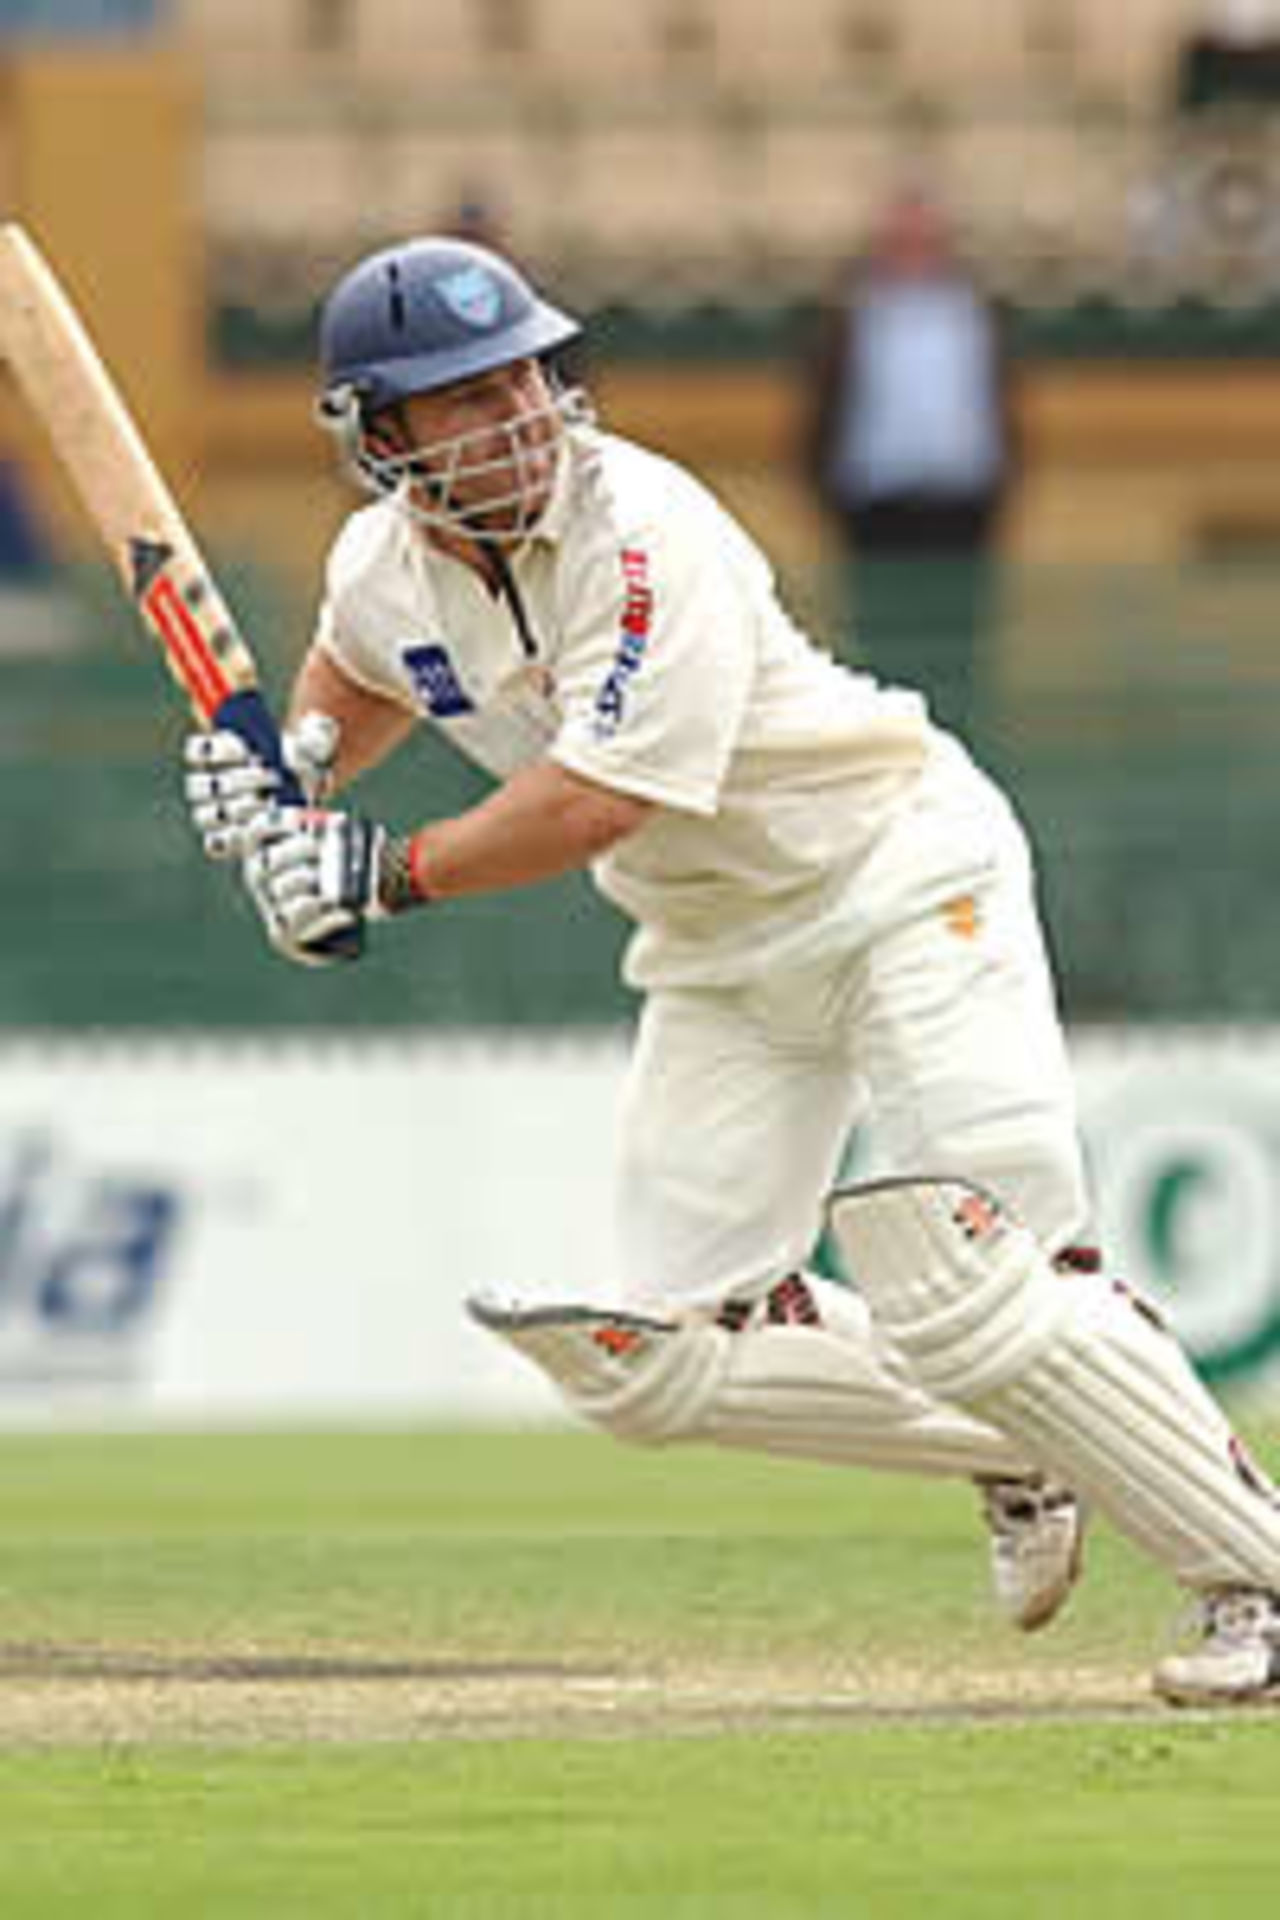 ADELAIDE - OCTOBER 25: Michael Slater of the Blues in action during the Pura Cup match between the Southern Redbacks and the New South Wales Blues held at Adelaide Oval, Adelaide, Australia on October 25, 2002